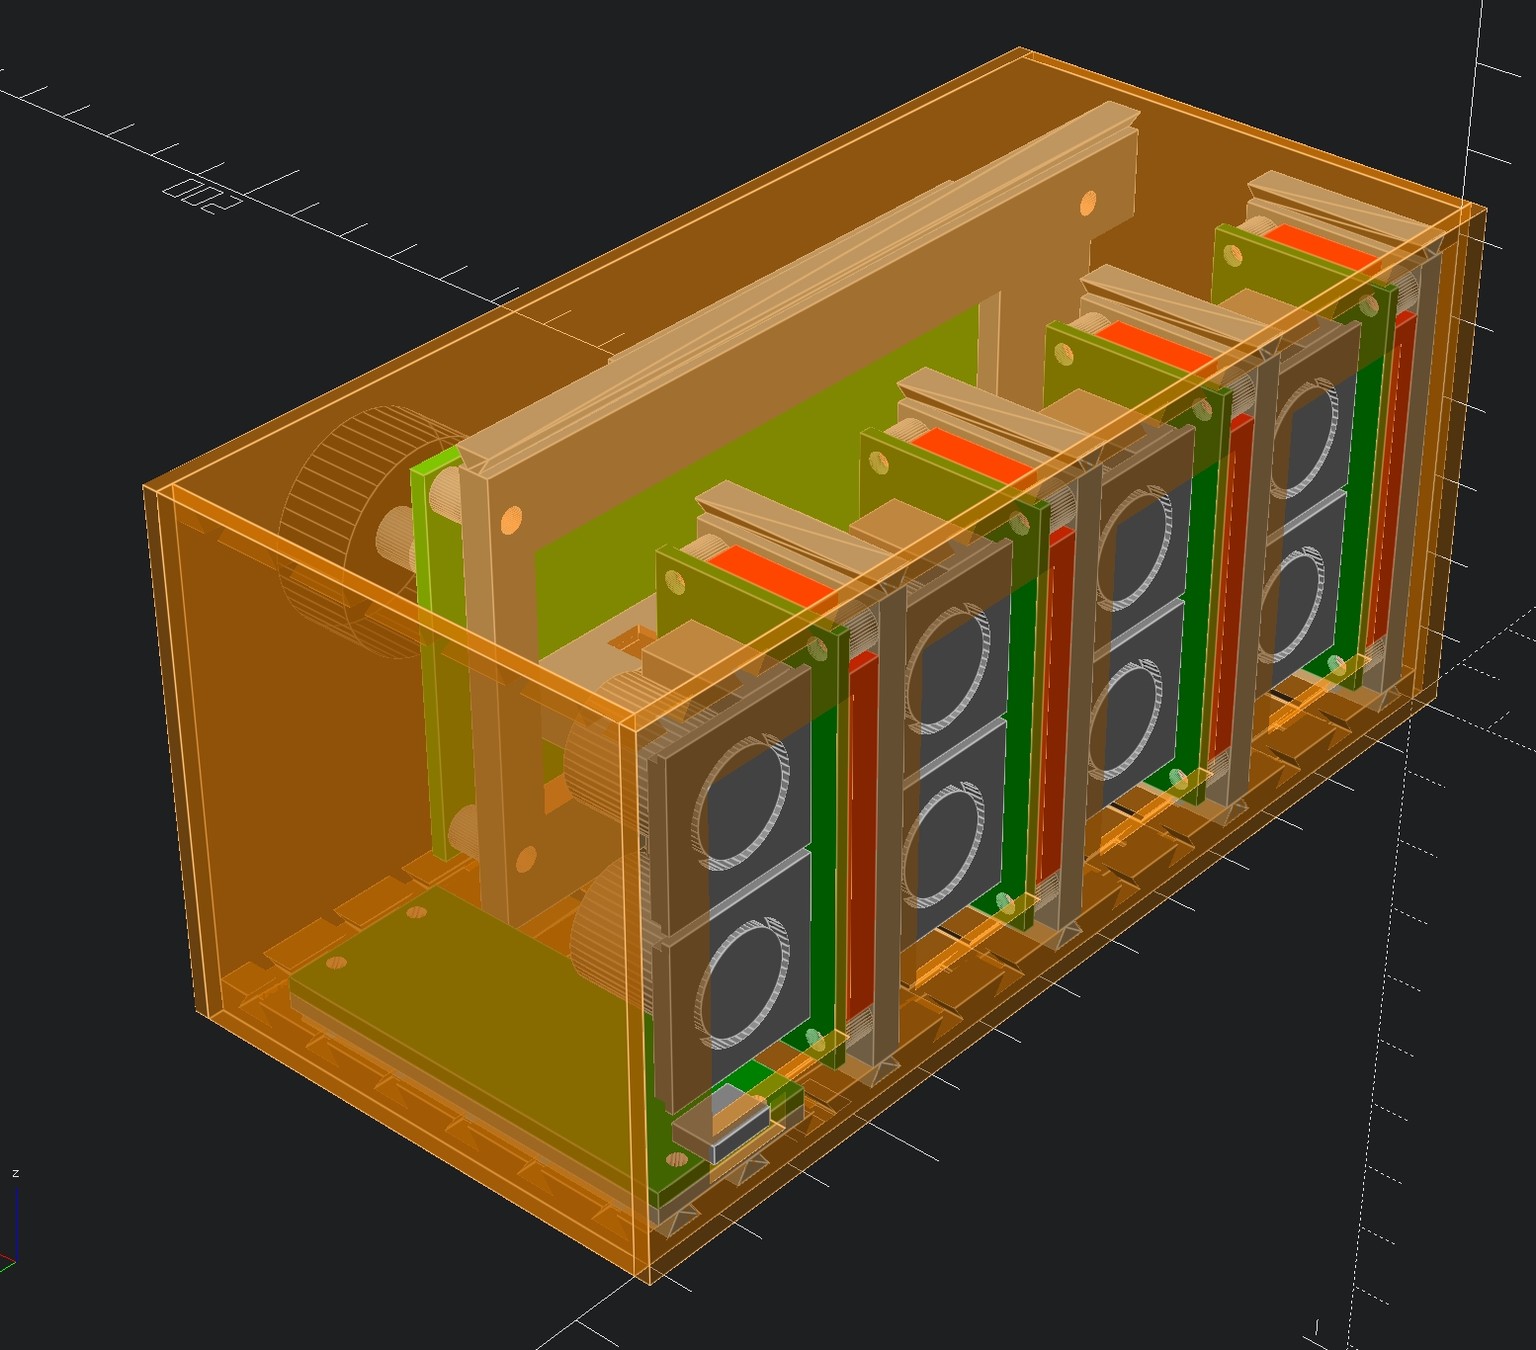 A OpenSCAD representation of a box with a display and 4 times 2 midi din ports